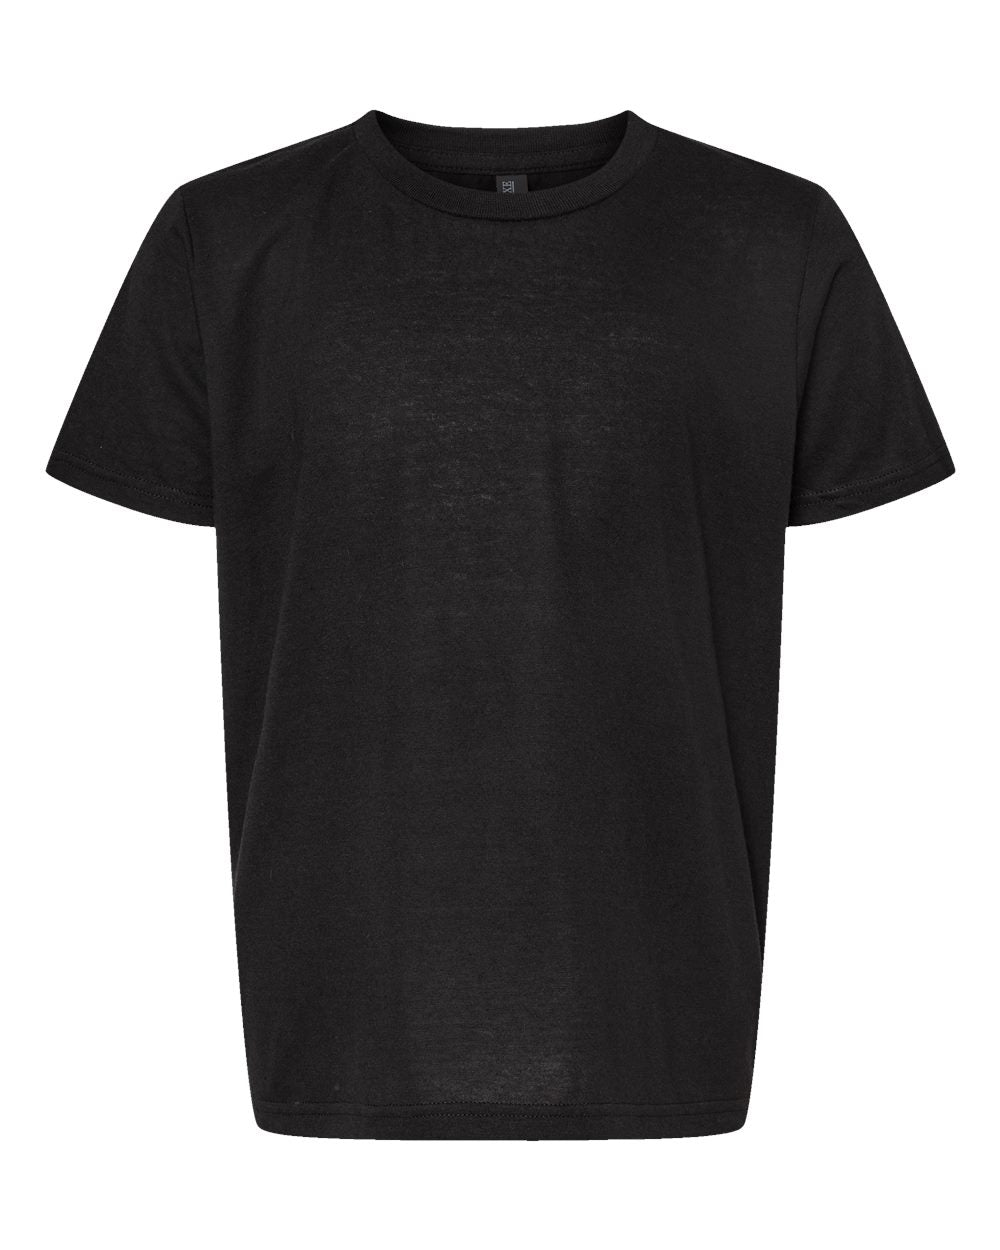 M&O Youth Deluxe Blend T-Shirt 3544 #color_Black